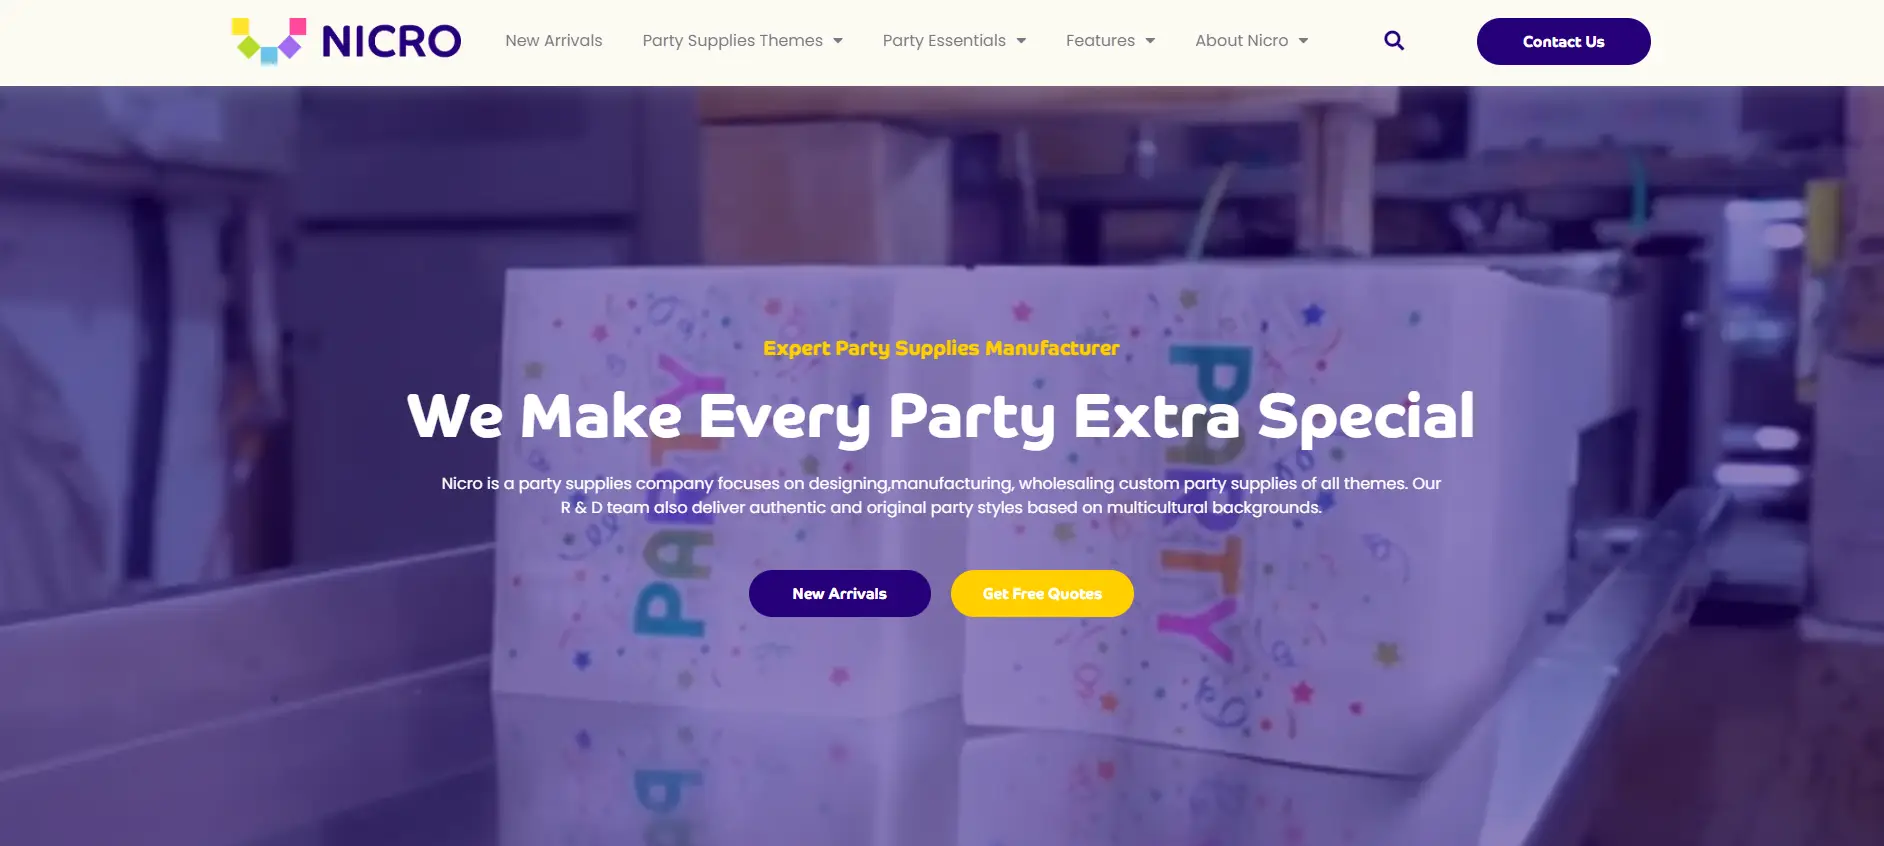 where to buy party supplies